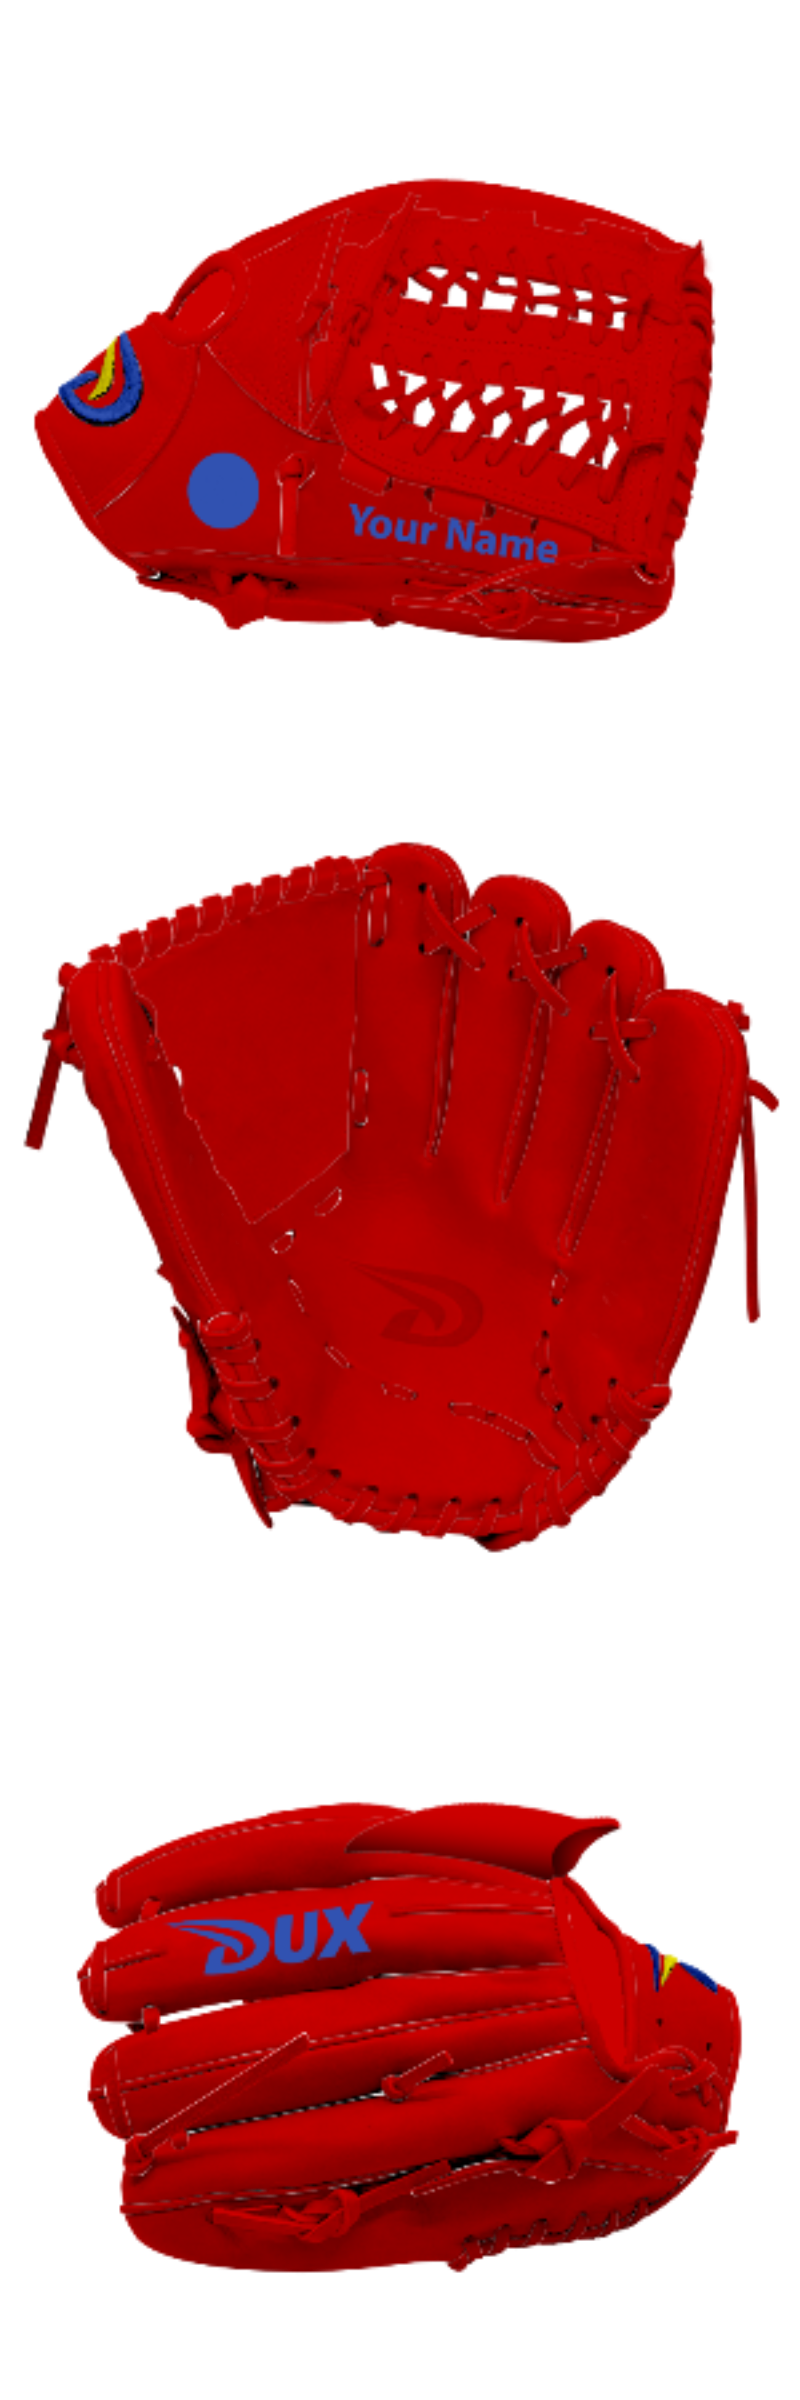 Dux Sports Custom Gloves - English - Customer's Product with price 149.99 ID HxbxNQ8EDNxYYQRm8TMSh8UY